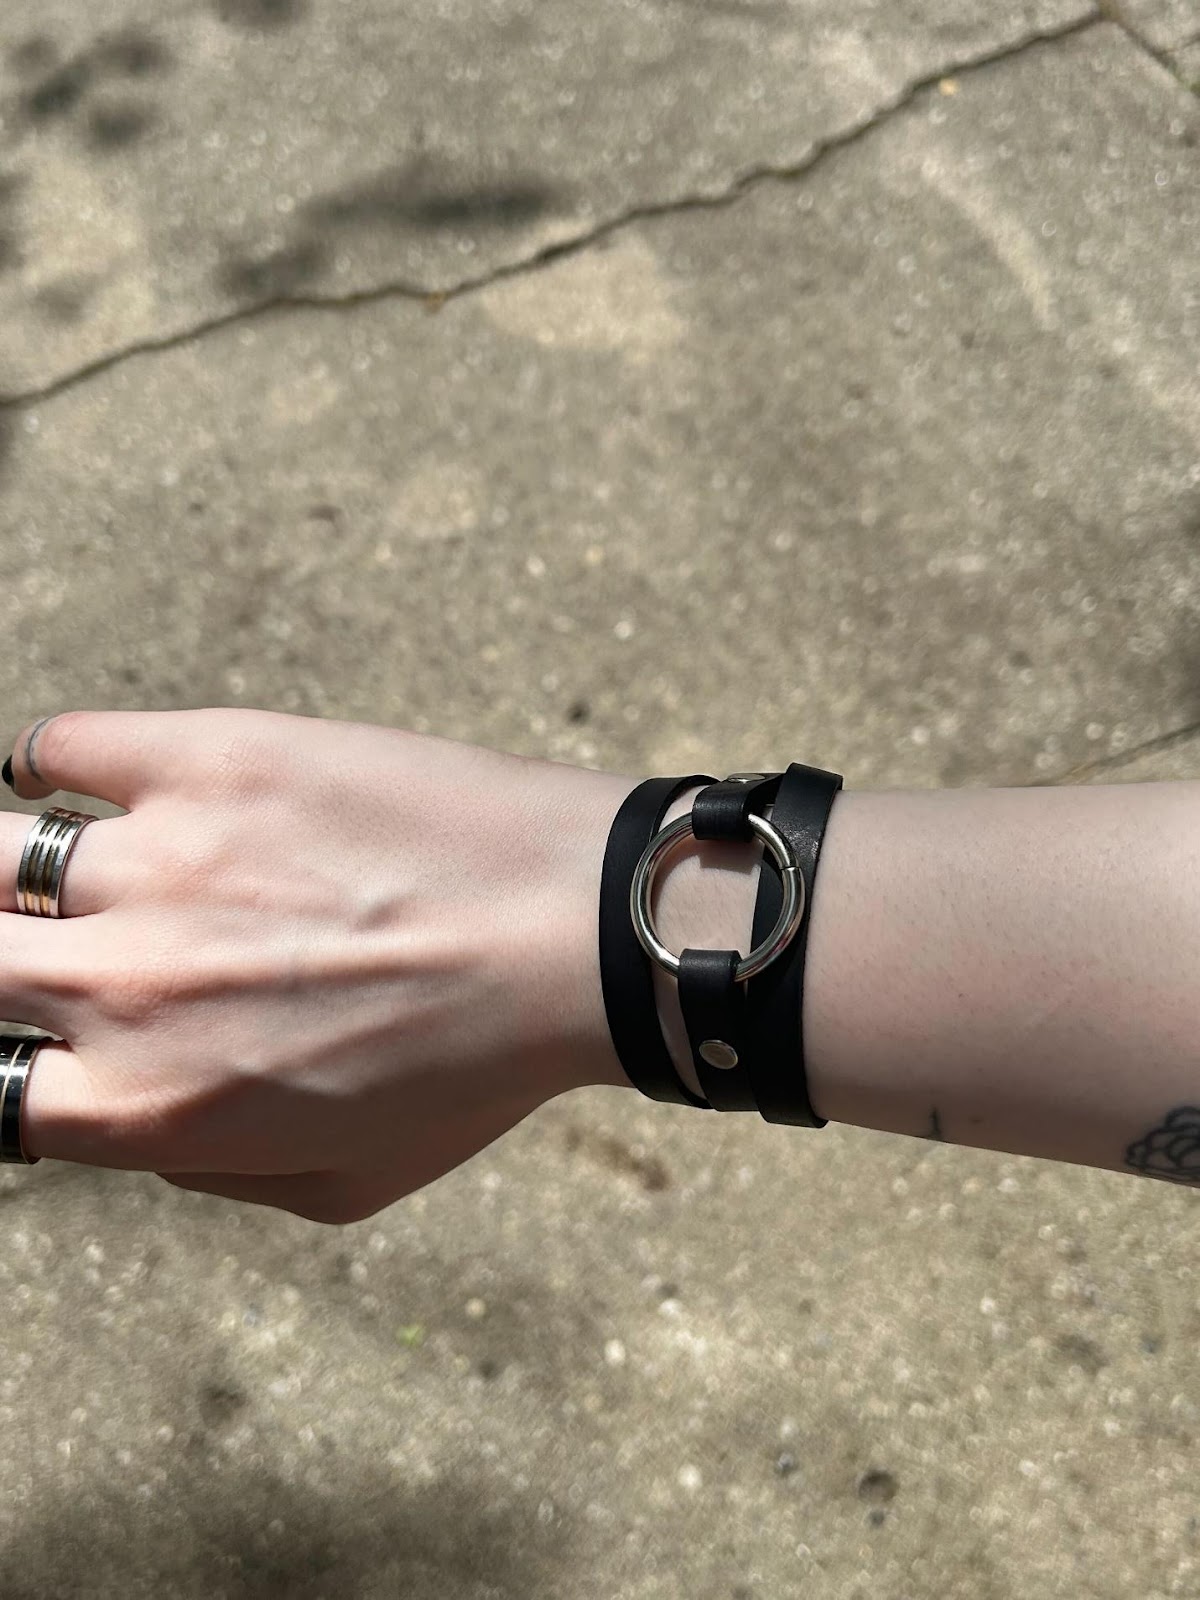 A hand with a leather bracelet

Description automatically generated